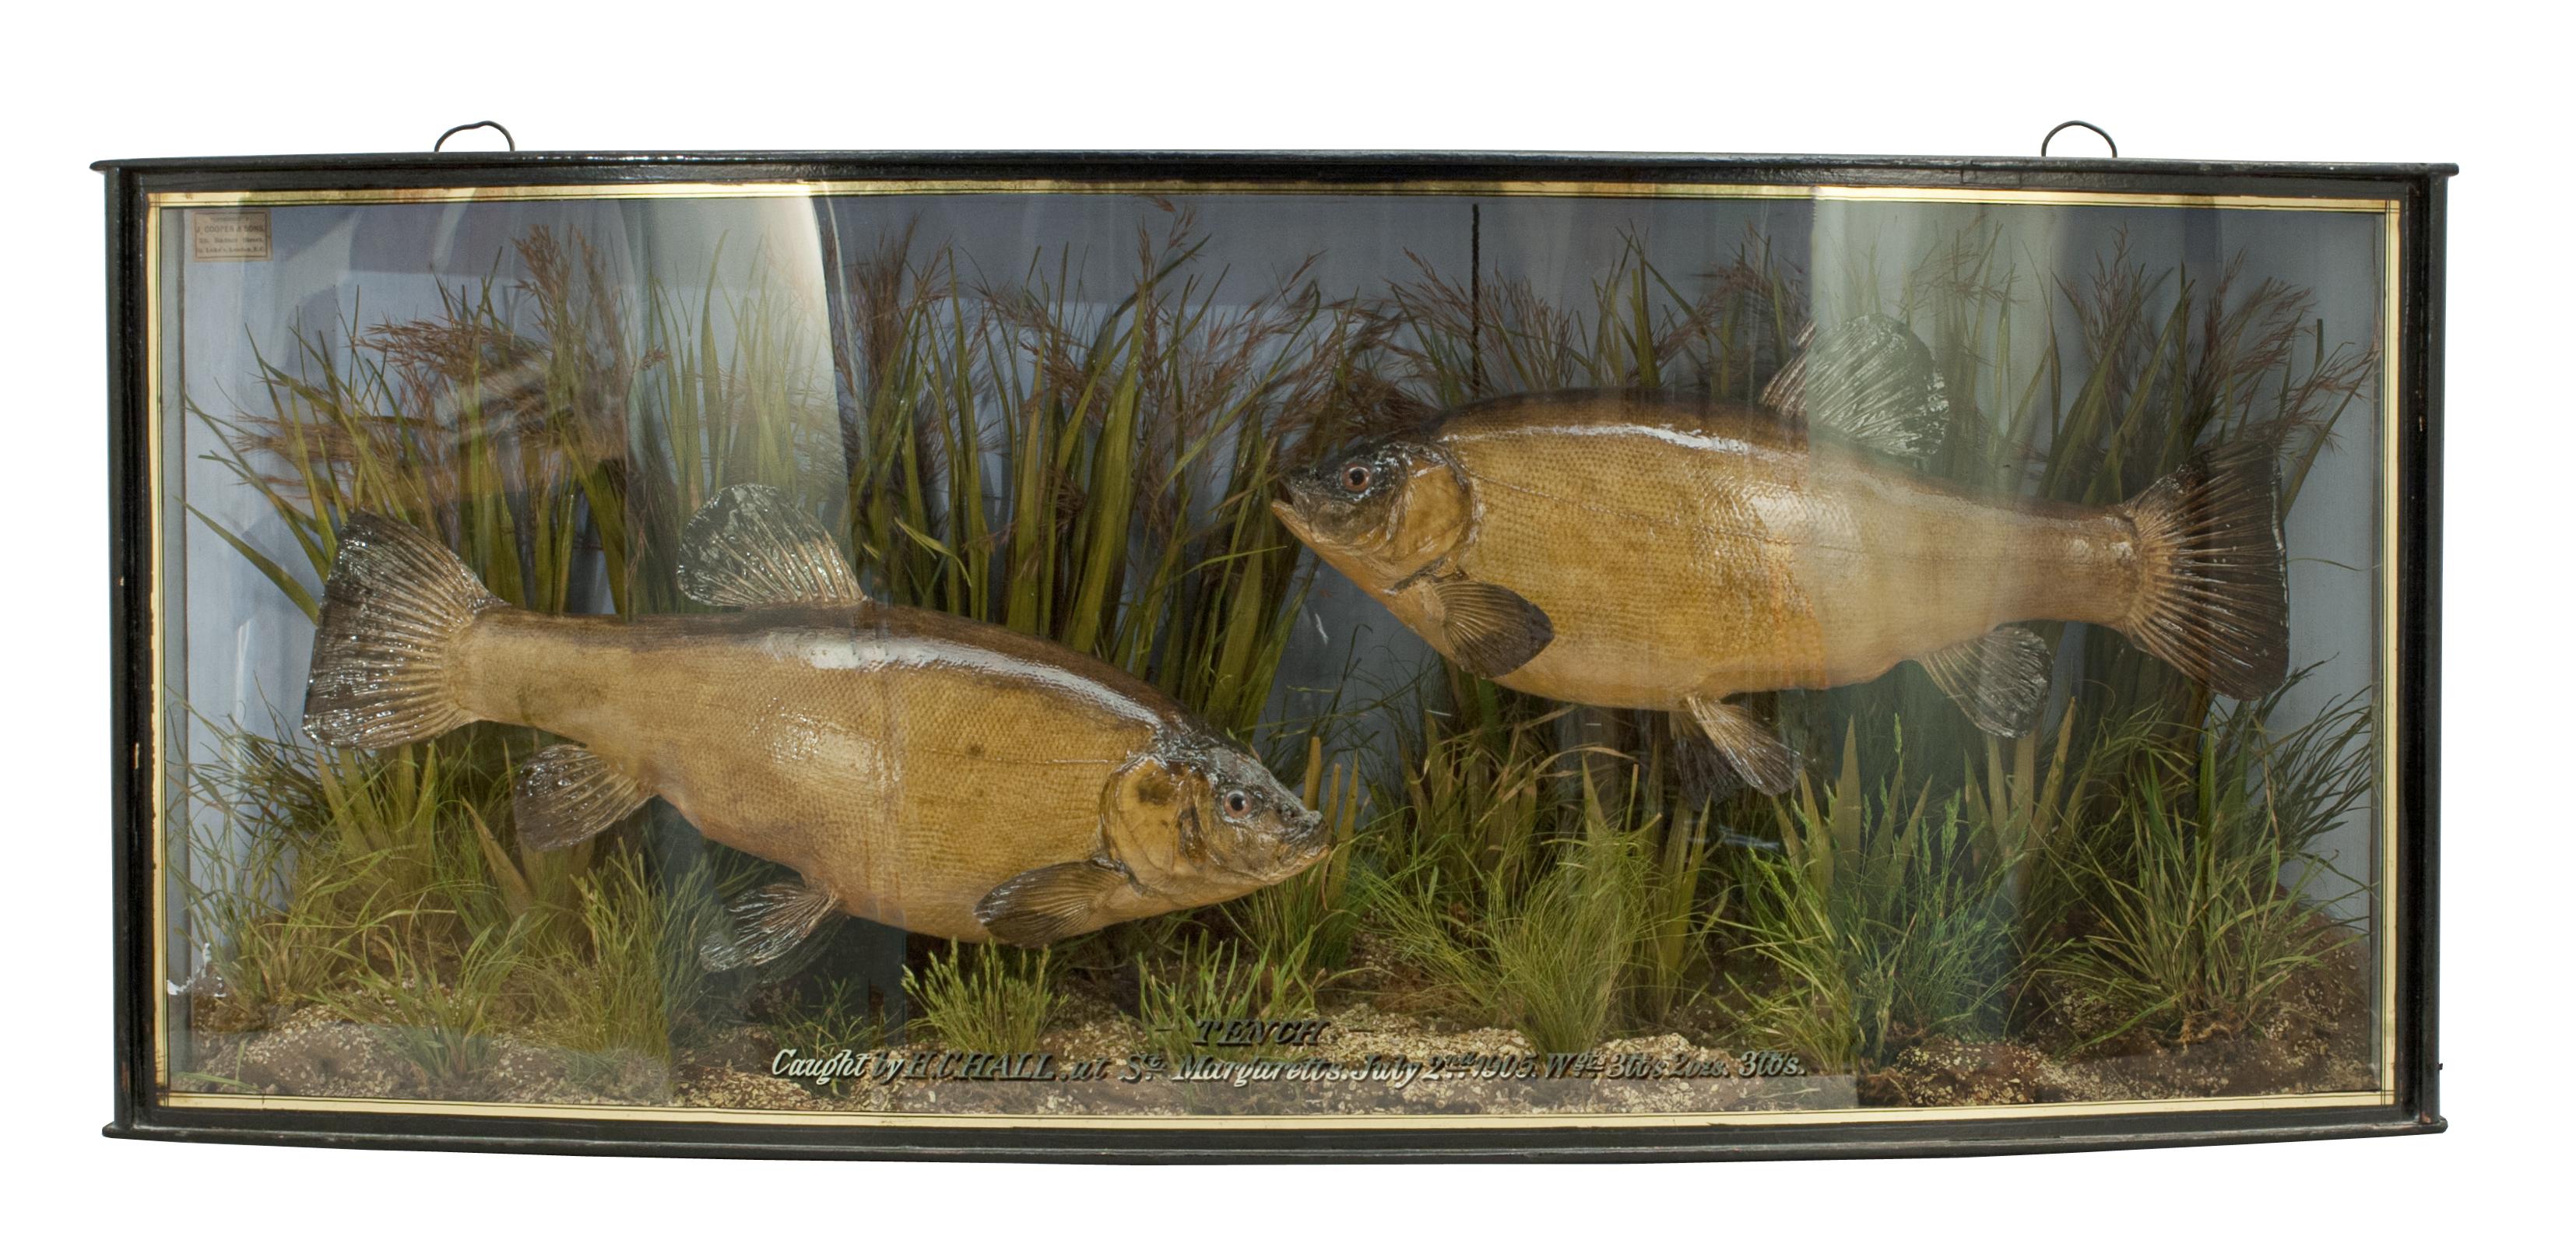 Taxidermy. Preserved Cooper fish.
A pair of cased Tench by Copper in a nice bow fronted case with gilt lines and gilt inscription to the front 'TENCH, caught by H.C.Hall, at St. Margaretts, July 2nd 1905, Wgts. 3lb's 2oz. 3lb's'. The case contains